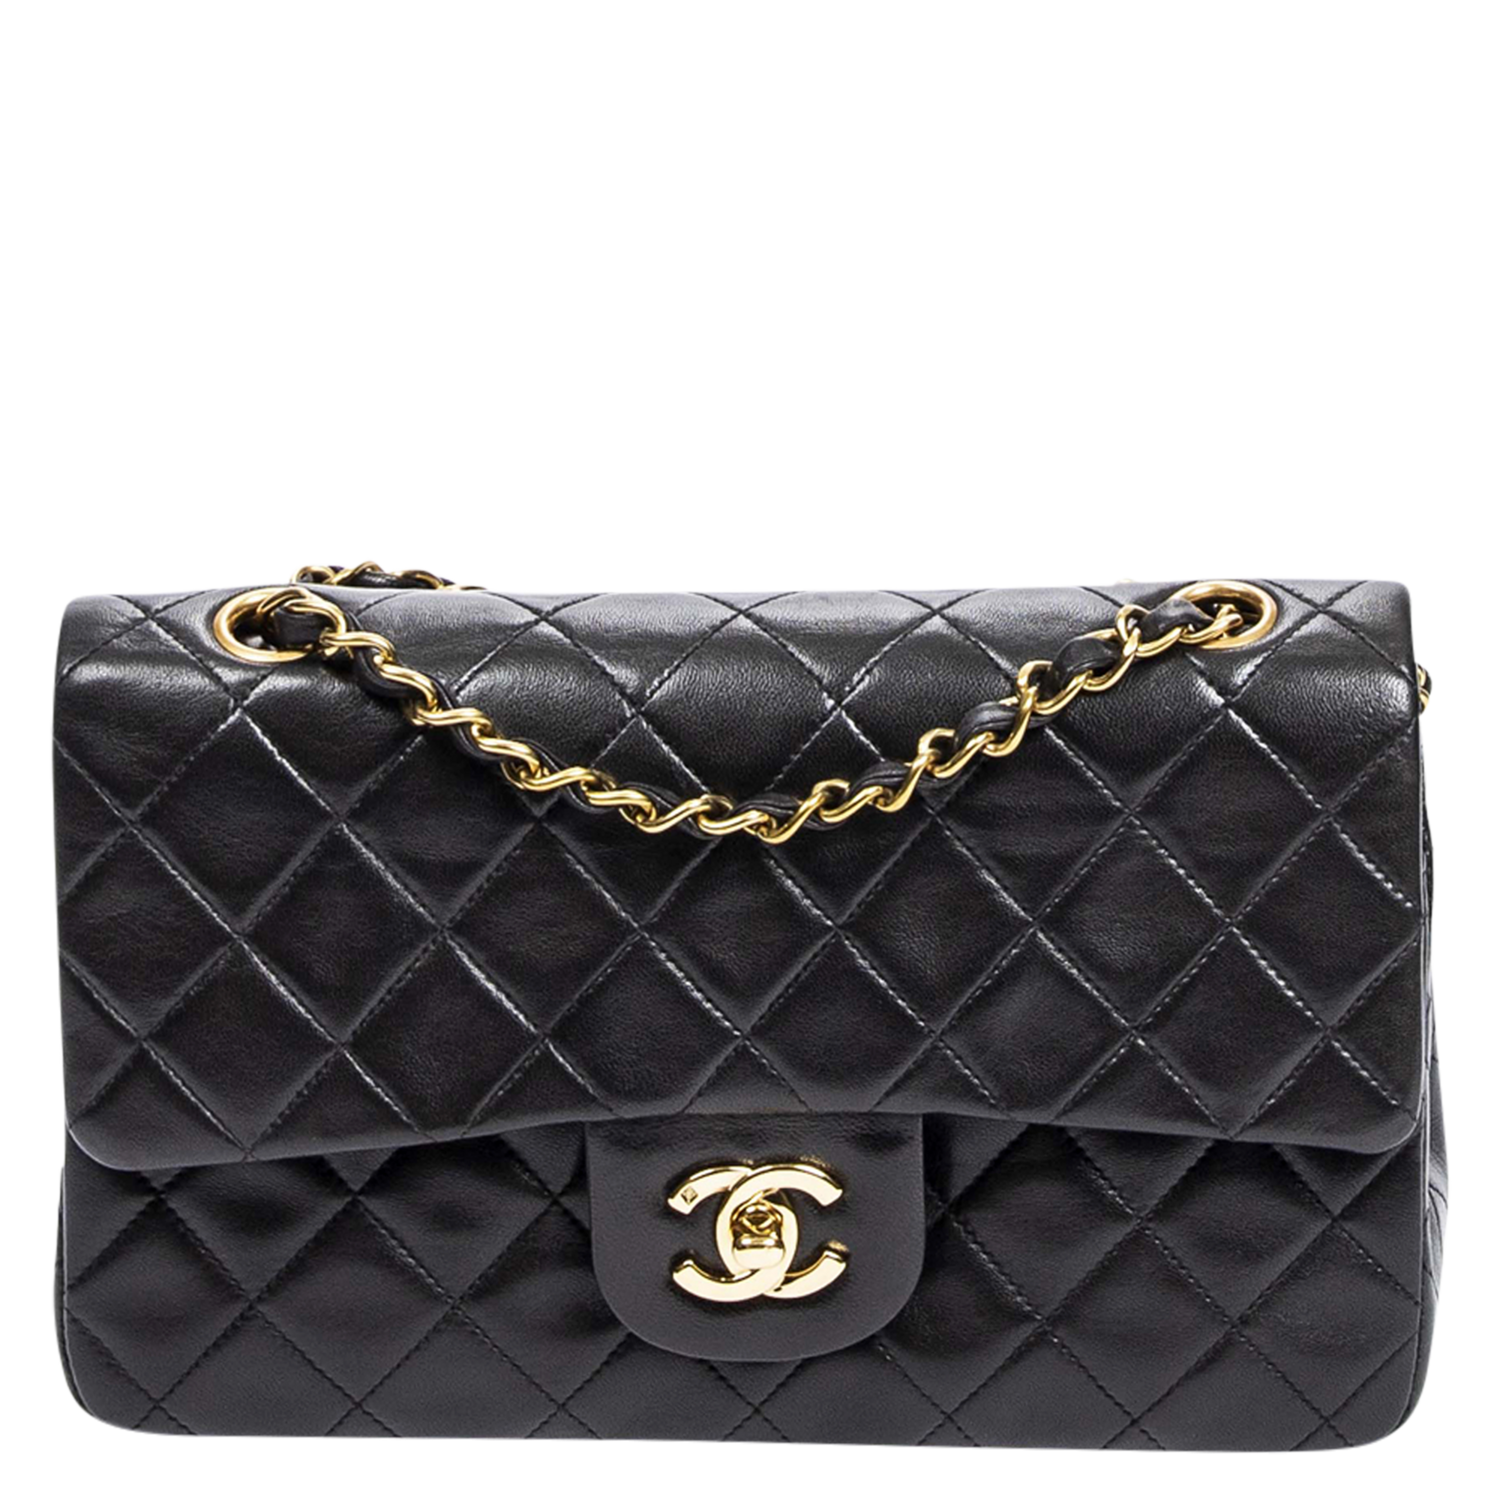 Chanel Black 1994 Classic Small Double Flap Bag